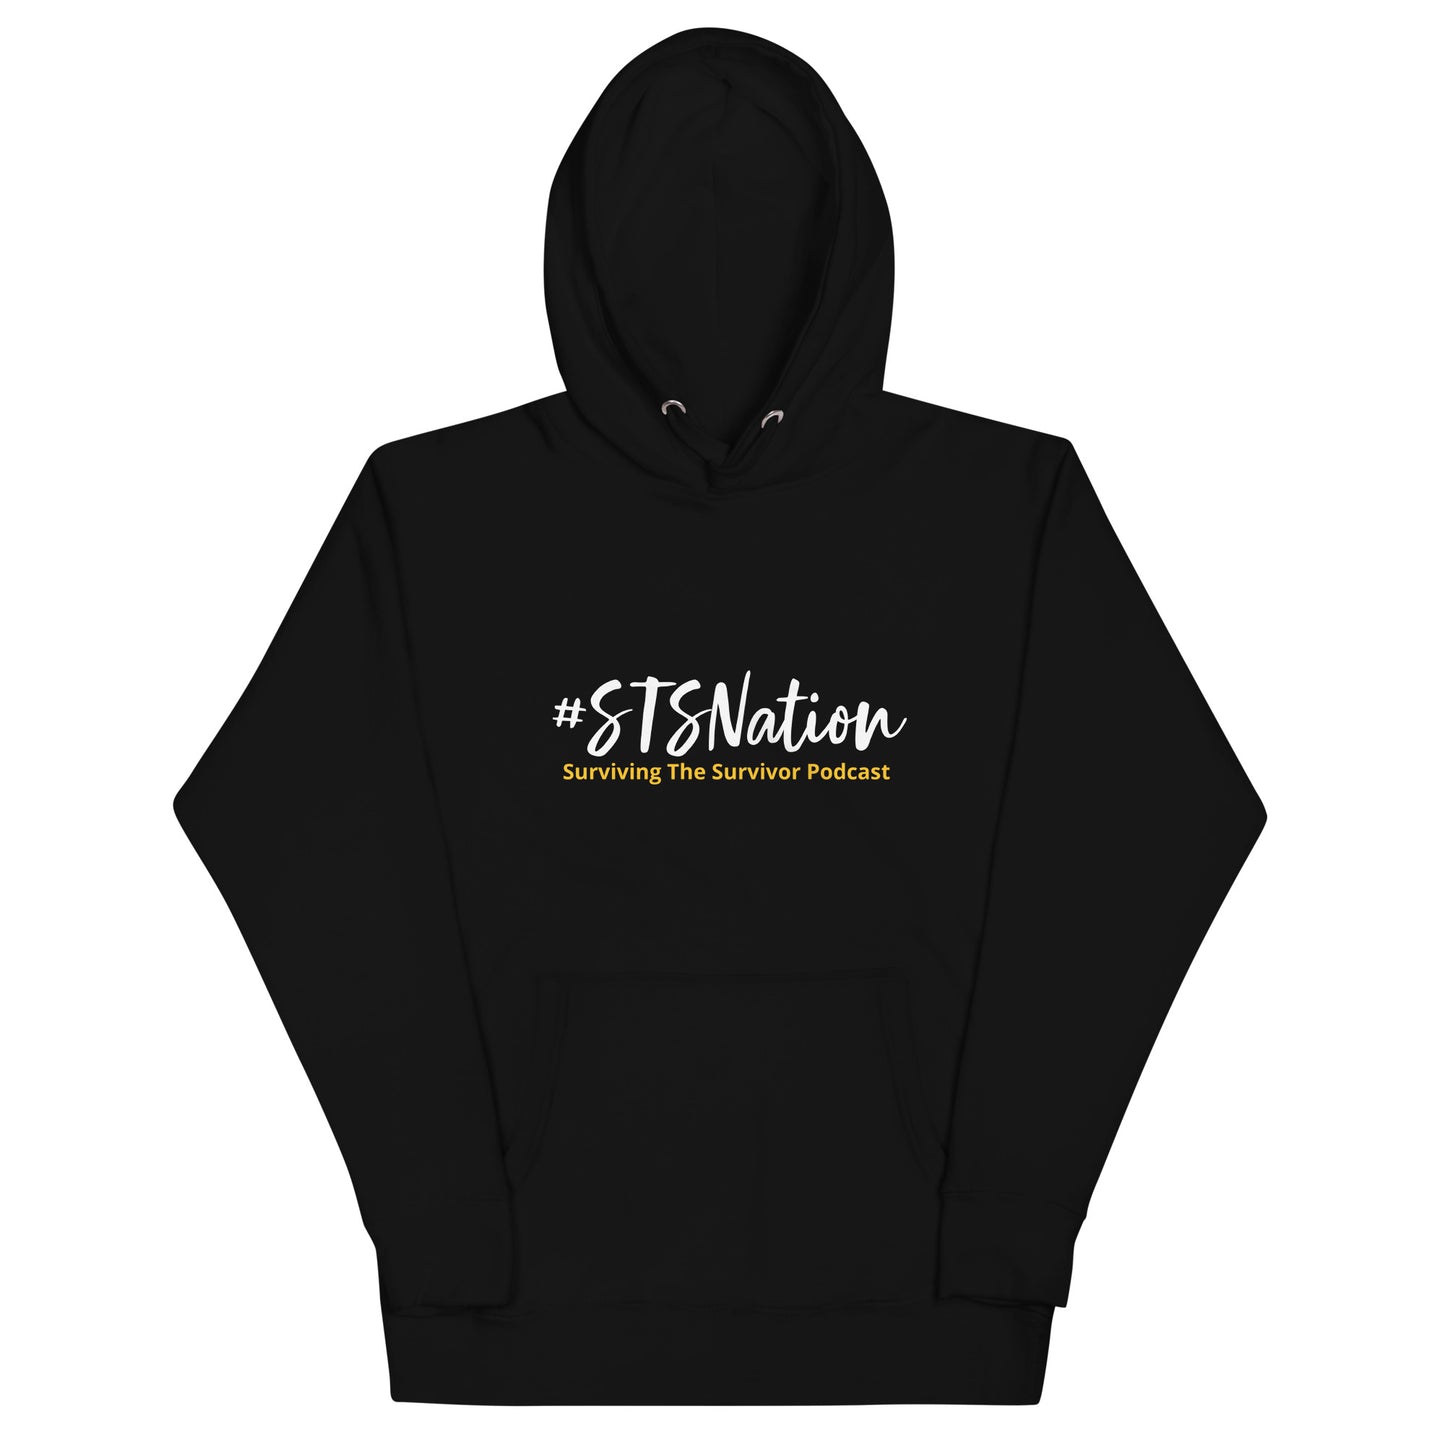 STSNation Podcast Hoodie